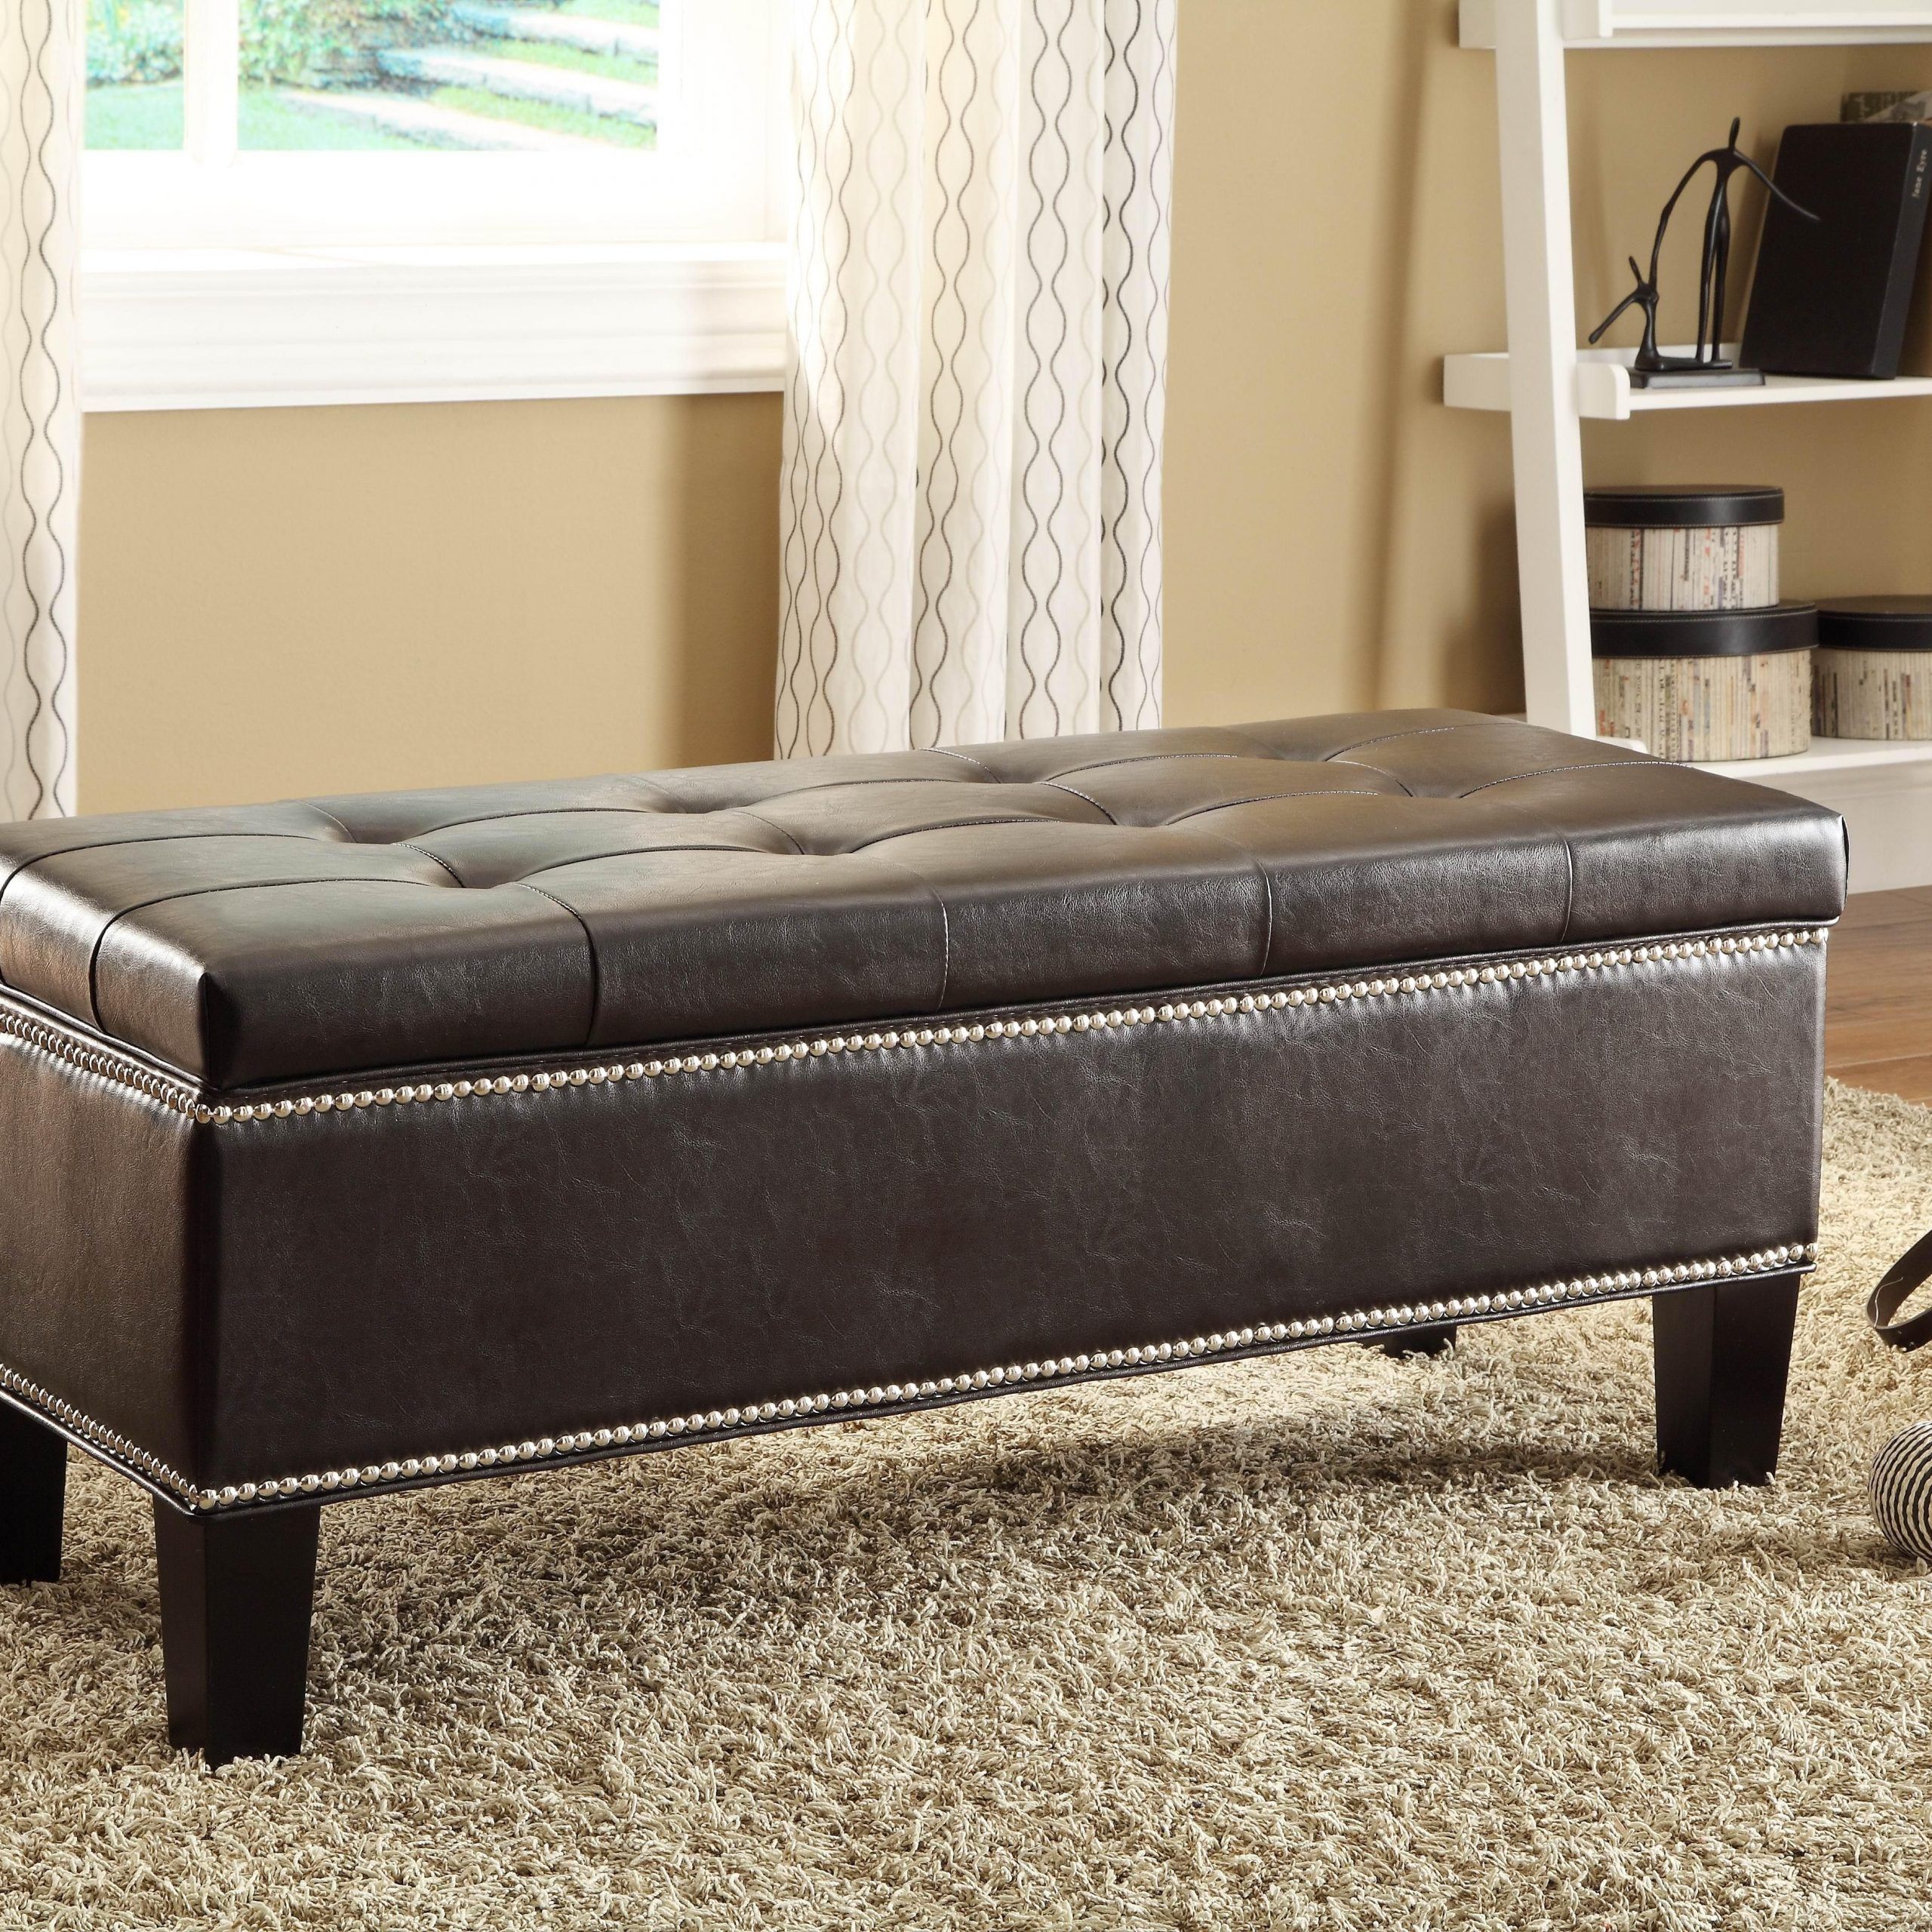 Black Bedroom Storage Bench – Home Designing Throughout Gray And Brown Stripes Cylinder Pouf Ottomans (View 3 of 20)